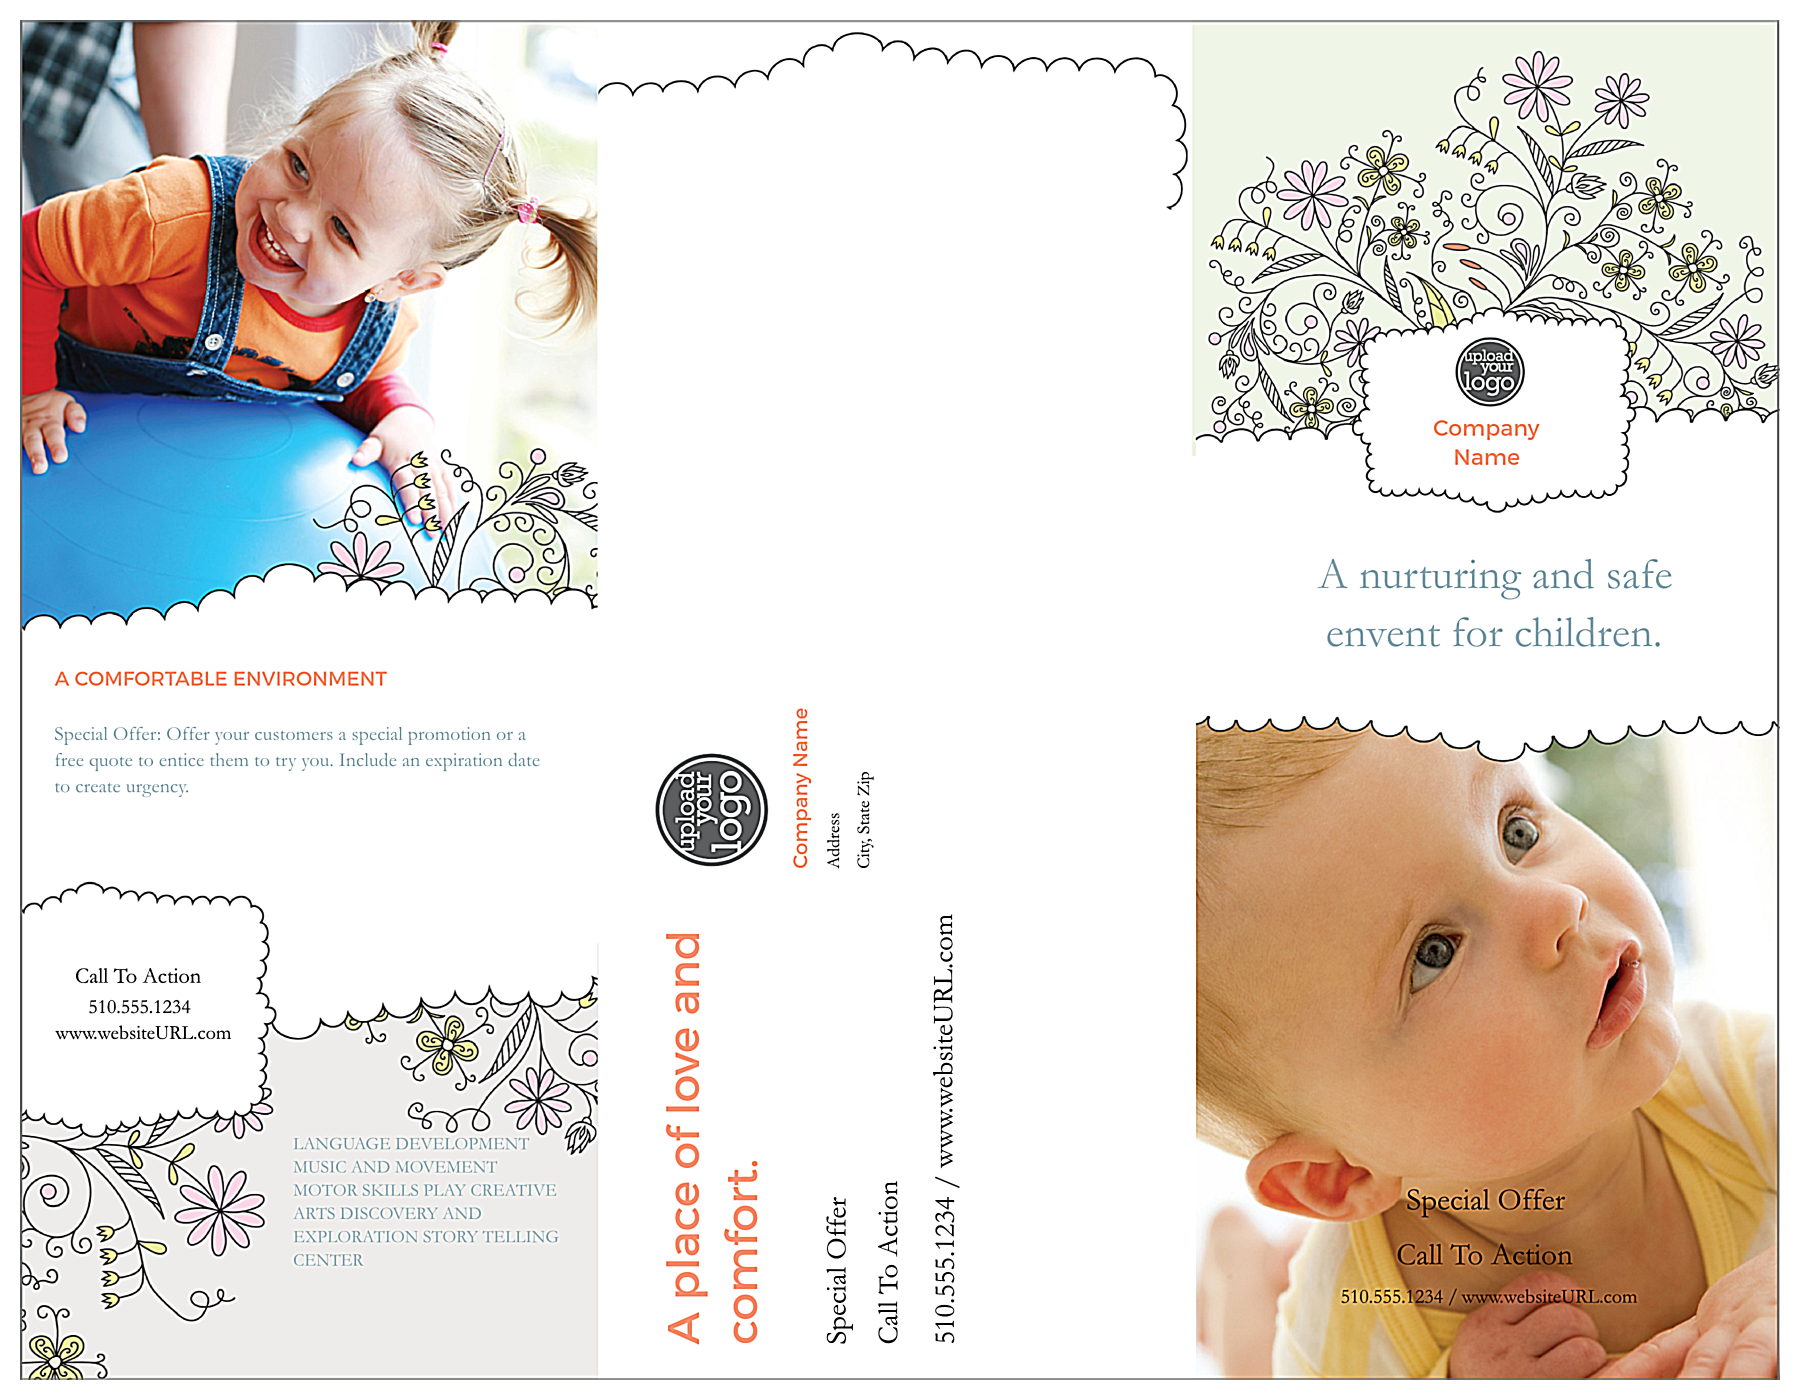 Fun Daycare front - Brochures Maker